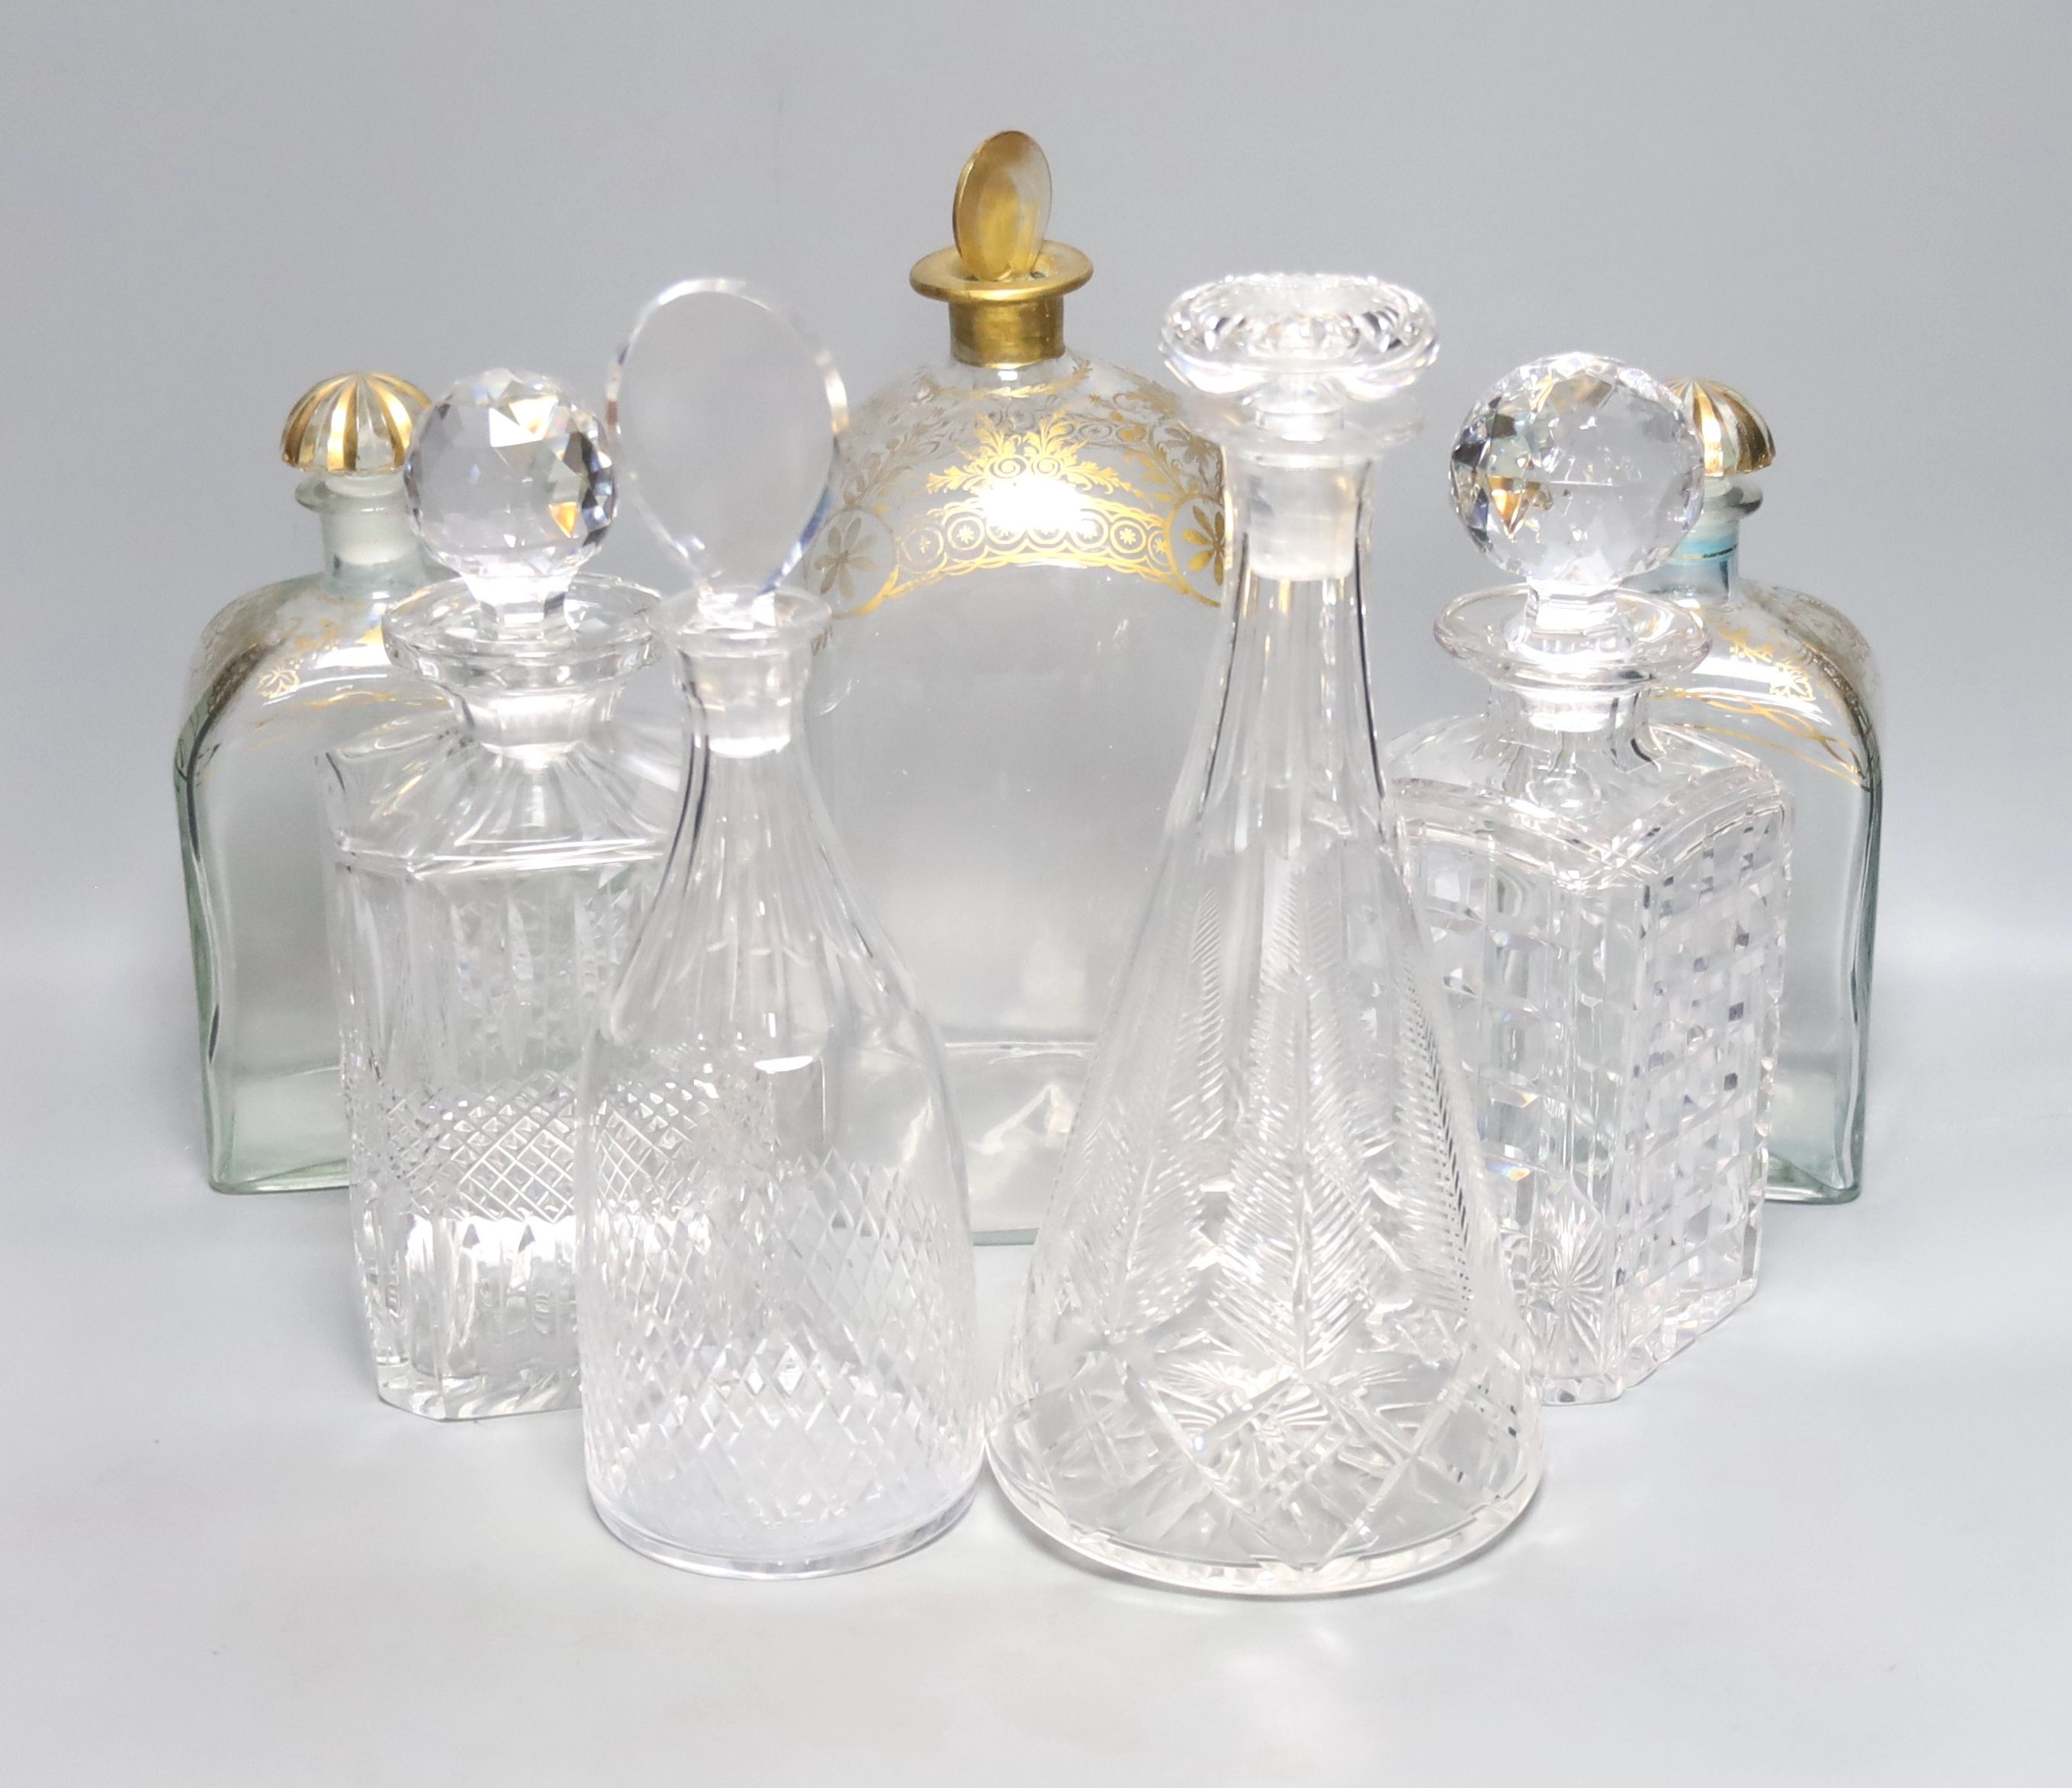 A Regency style decanter with lozenge-shaped stopper, a pair of gilt-decorated Spanish 'Jerez' decanters, a similar larger decanter and five other decanters